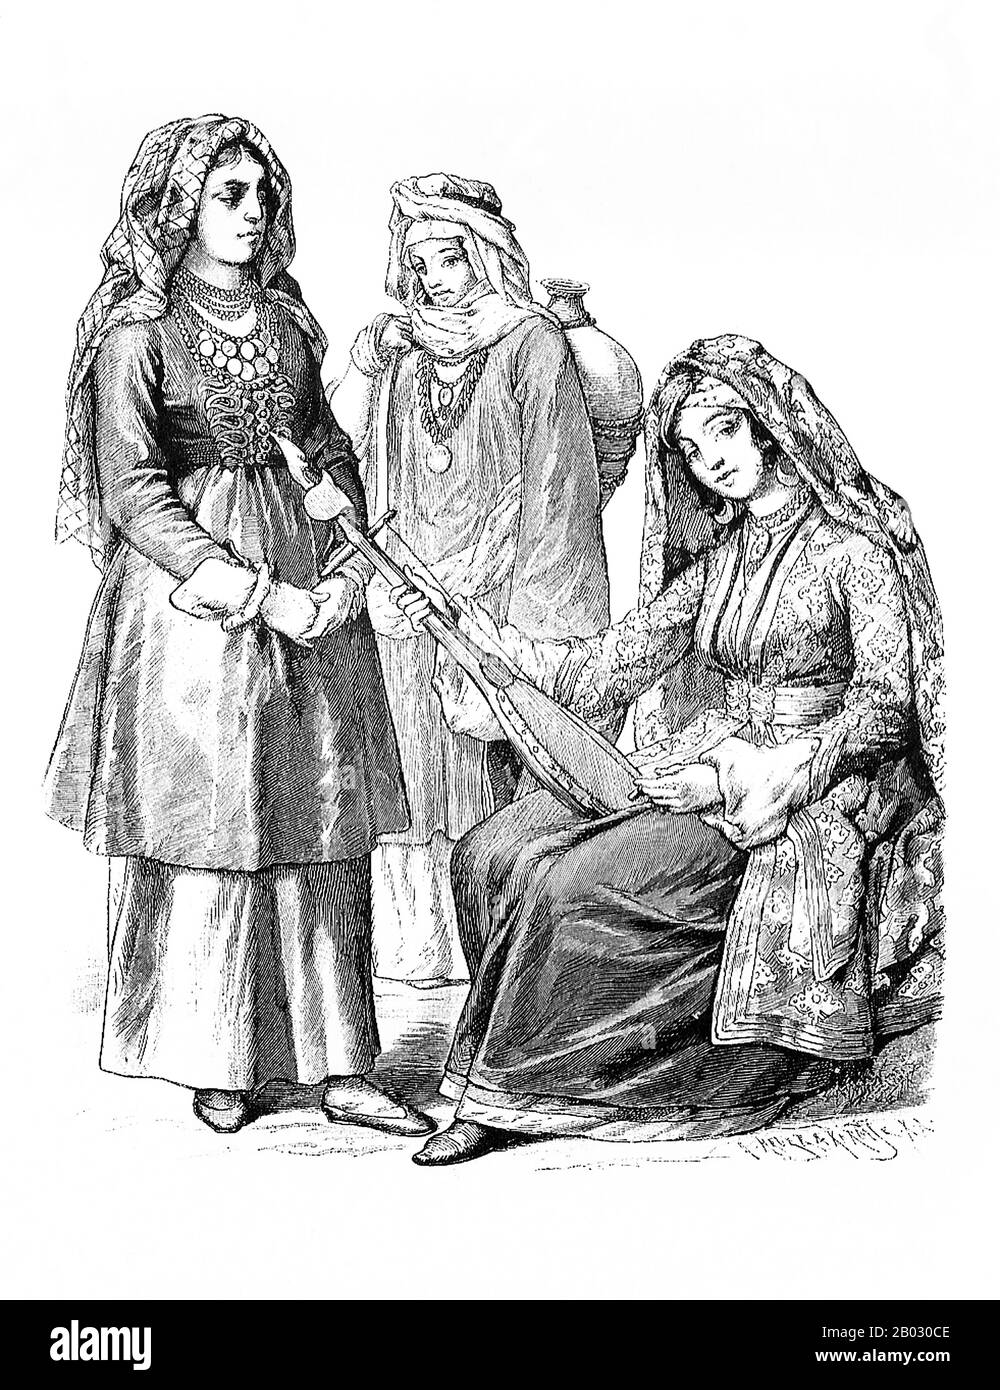 From 1861 to 1890 the Munich publishing firm of Braun and Schneider published plates of historic and contemporary  costume in their magazine Munchener Bilderbogen.  These plates were eventually collected in book form and published at the turn of the century in Germany and England. Stock Photo